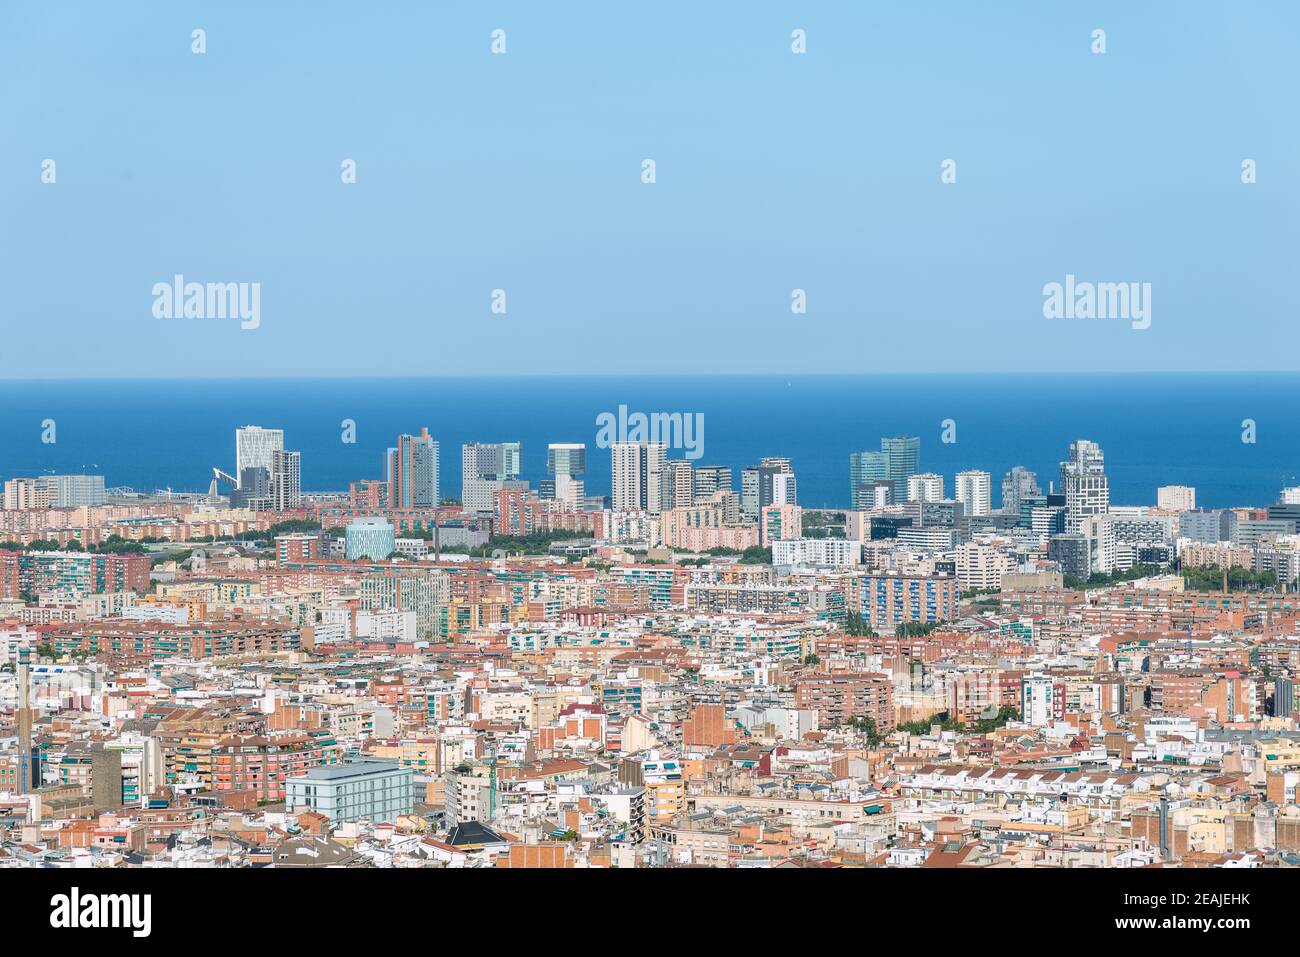 The high-rise buildings of the El Poblenou district of Barcelona Stock Photo